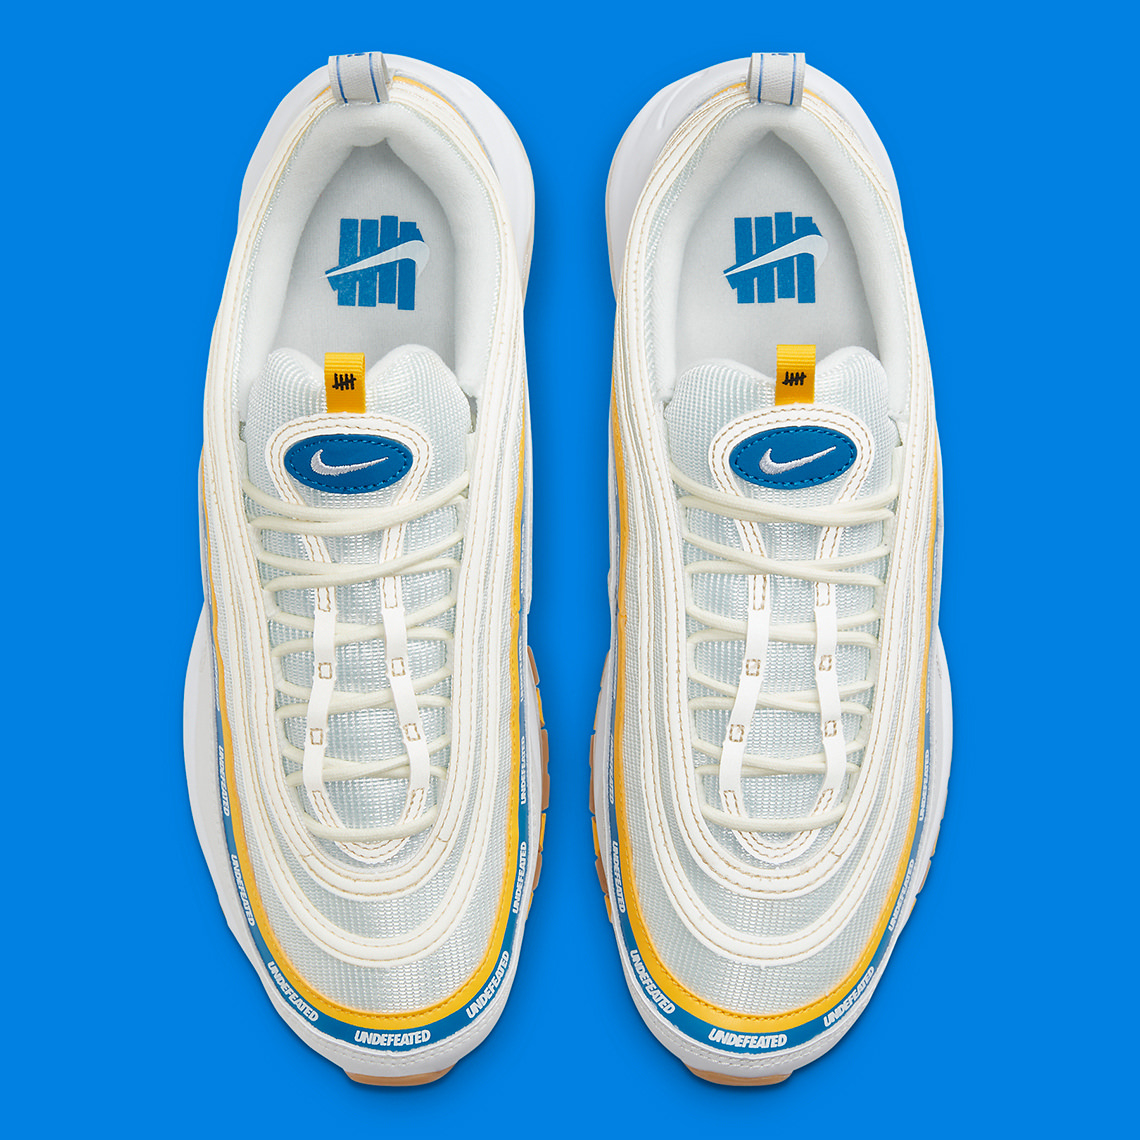 undefeated-nike-air-max-97-ucla-DC4830-100-release-date-4